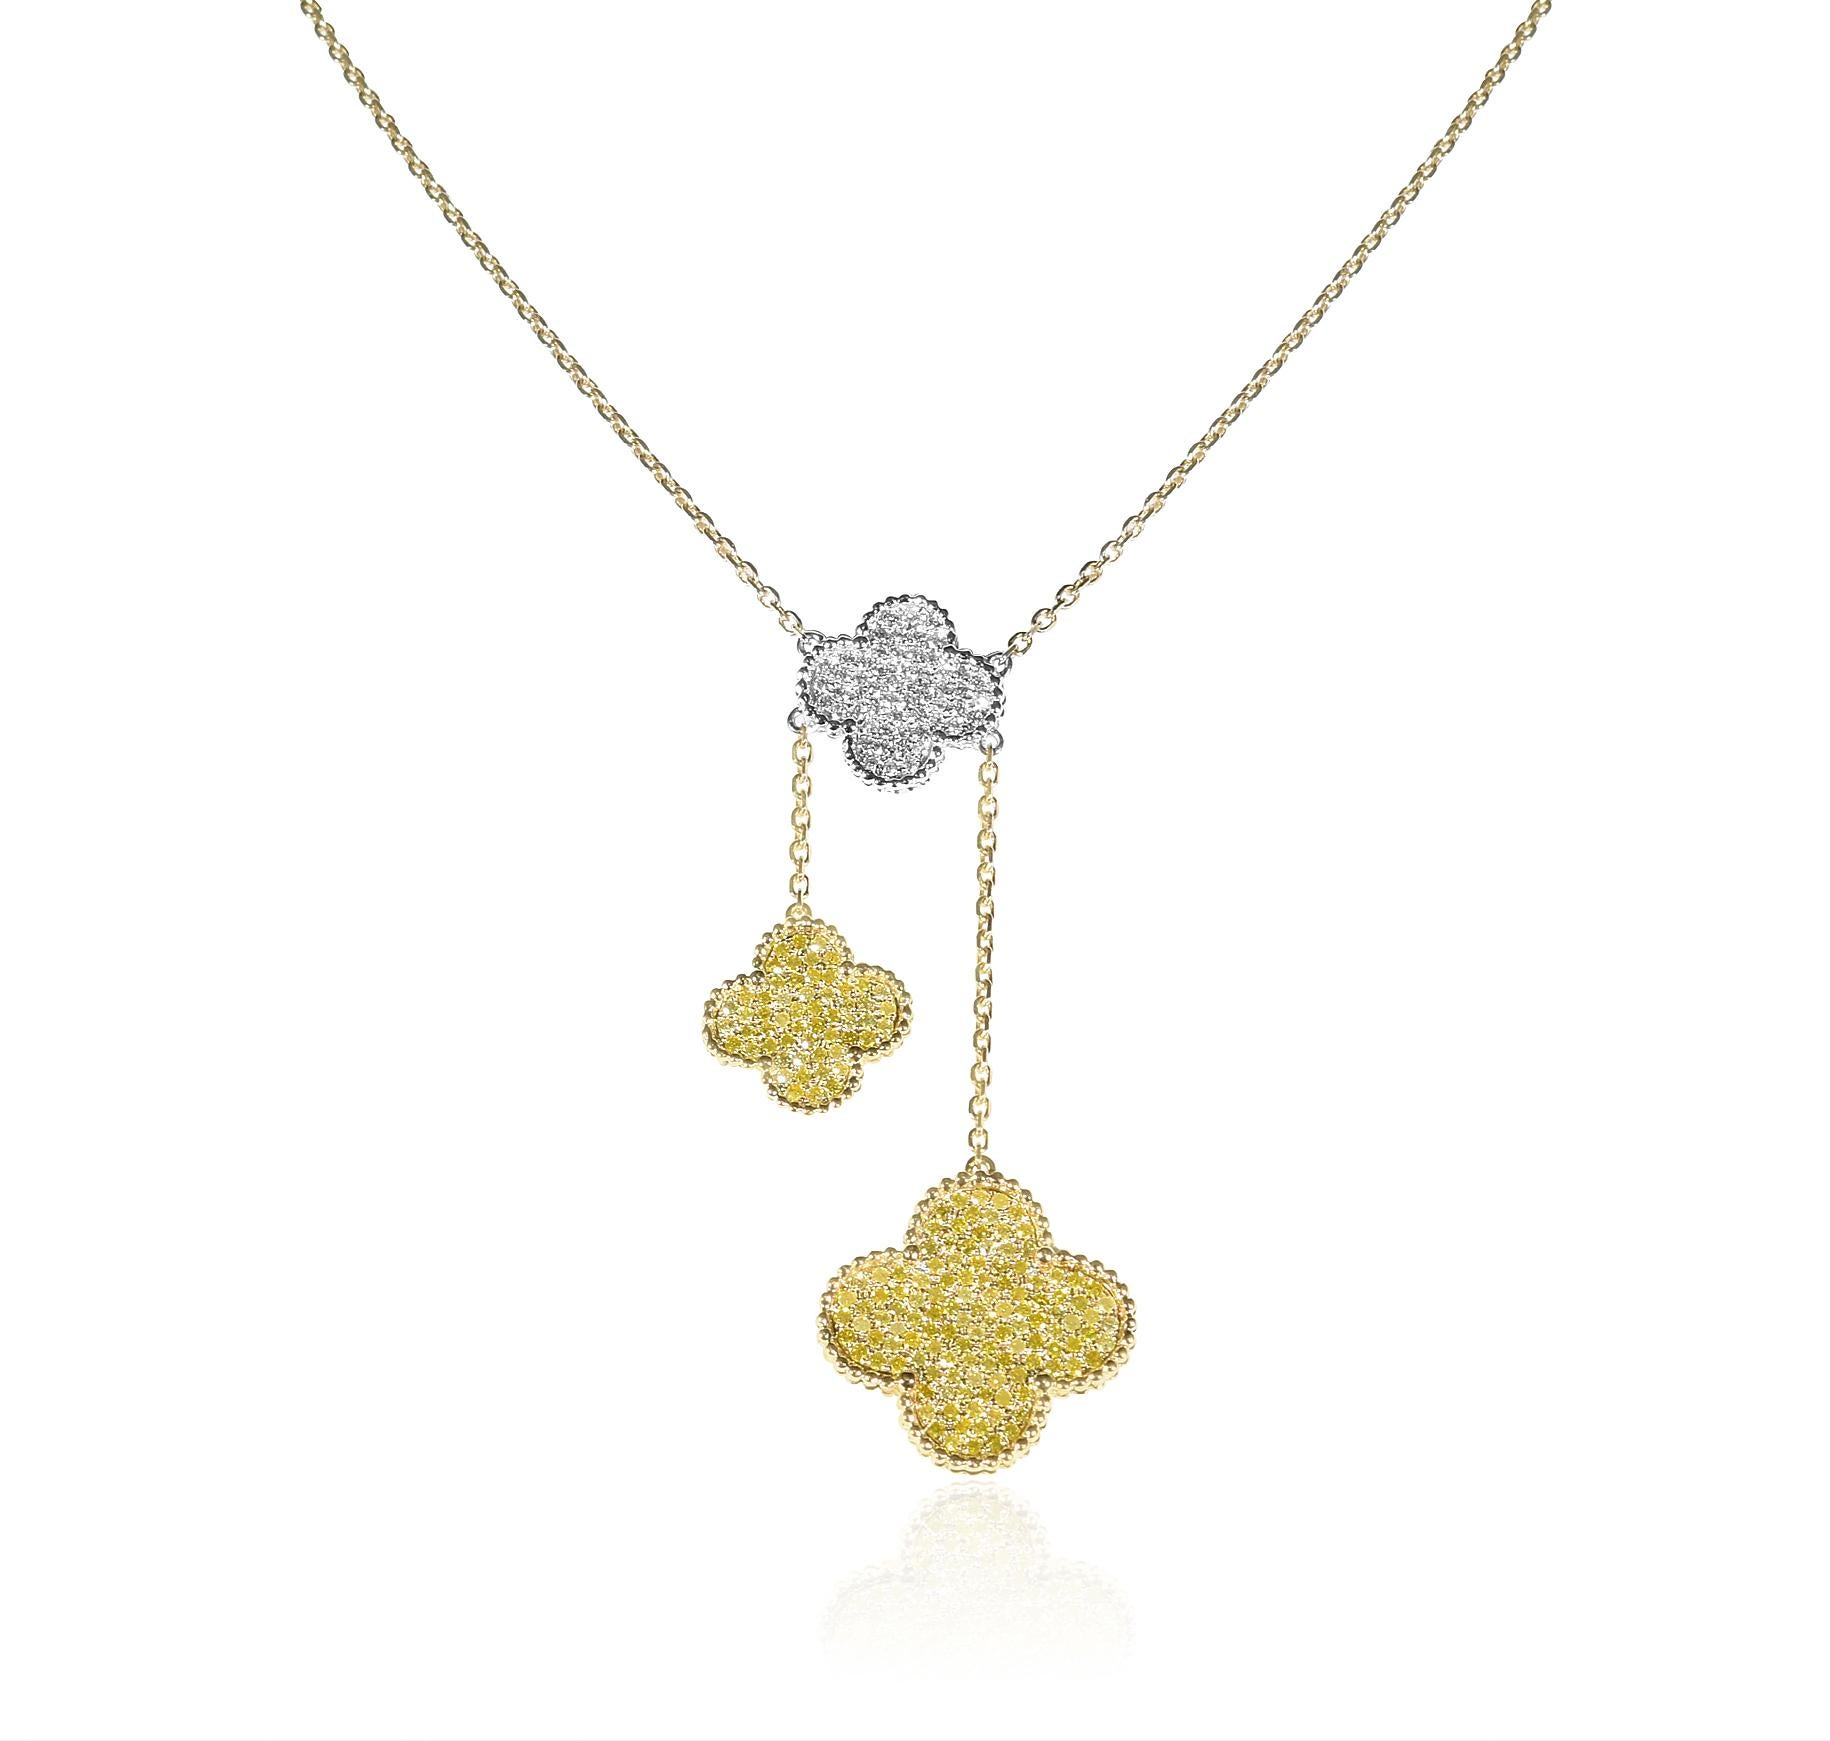 The Following Item we are offering is A Rare 18KT Gold Fancy Large Fancy Double Yellow Diamond Clover and White Diamond Clover Necklace. Necklace is comprised of Finely Set Glittering Gorgeous Fancy Yellow Diamonds and White Diamonds forming